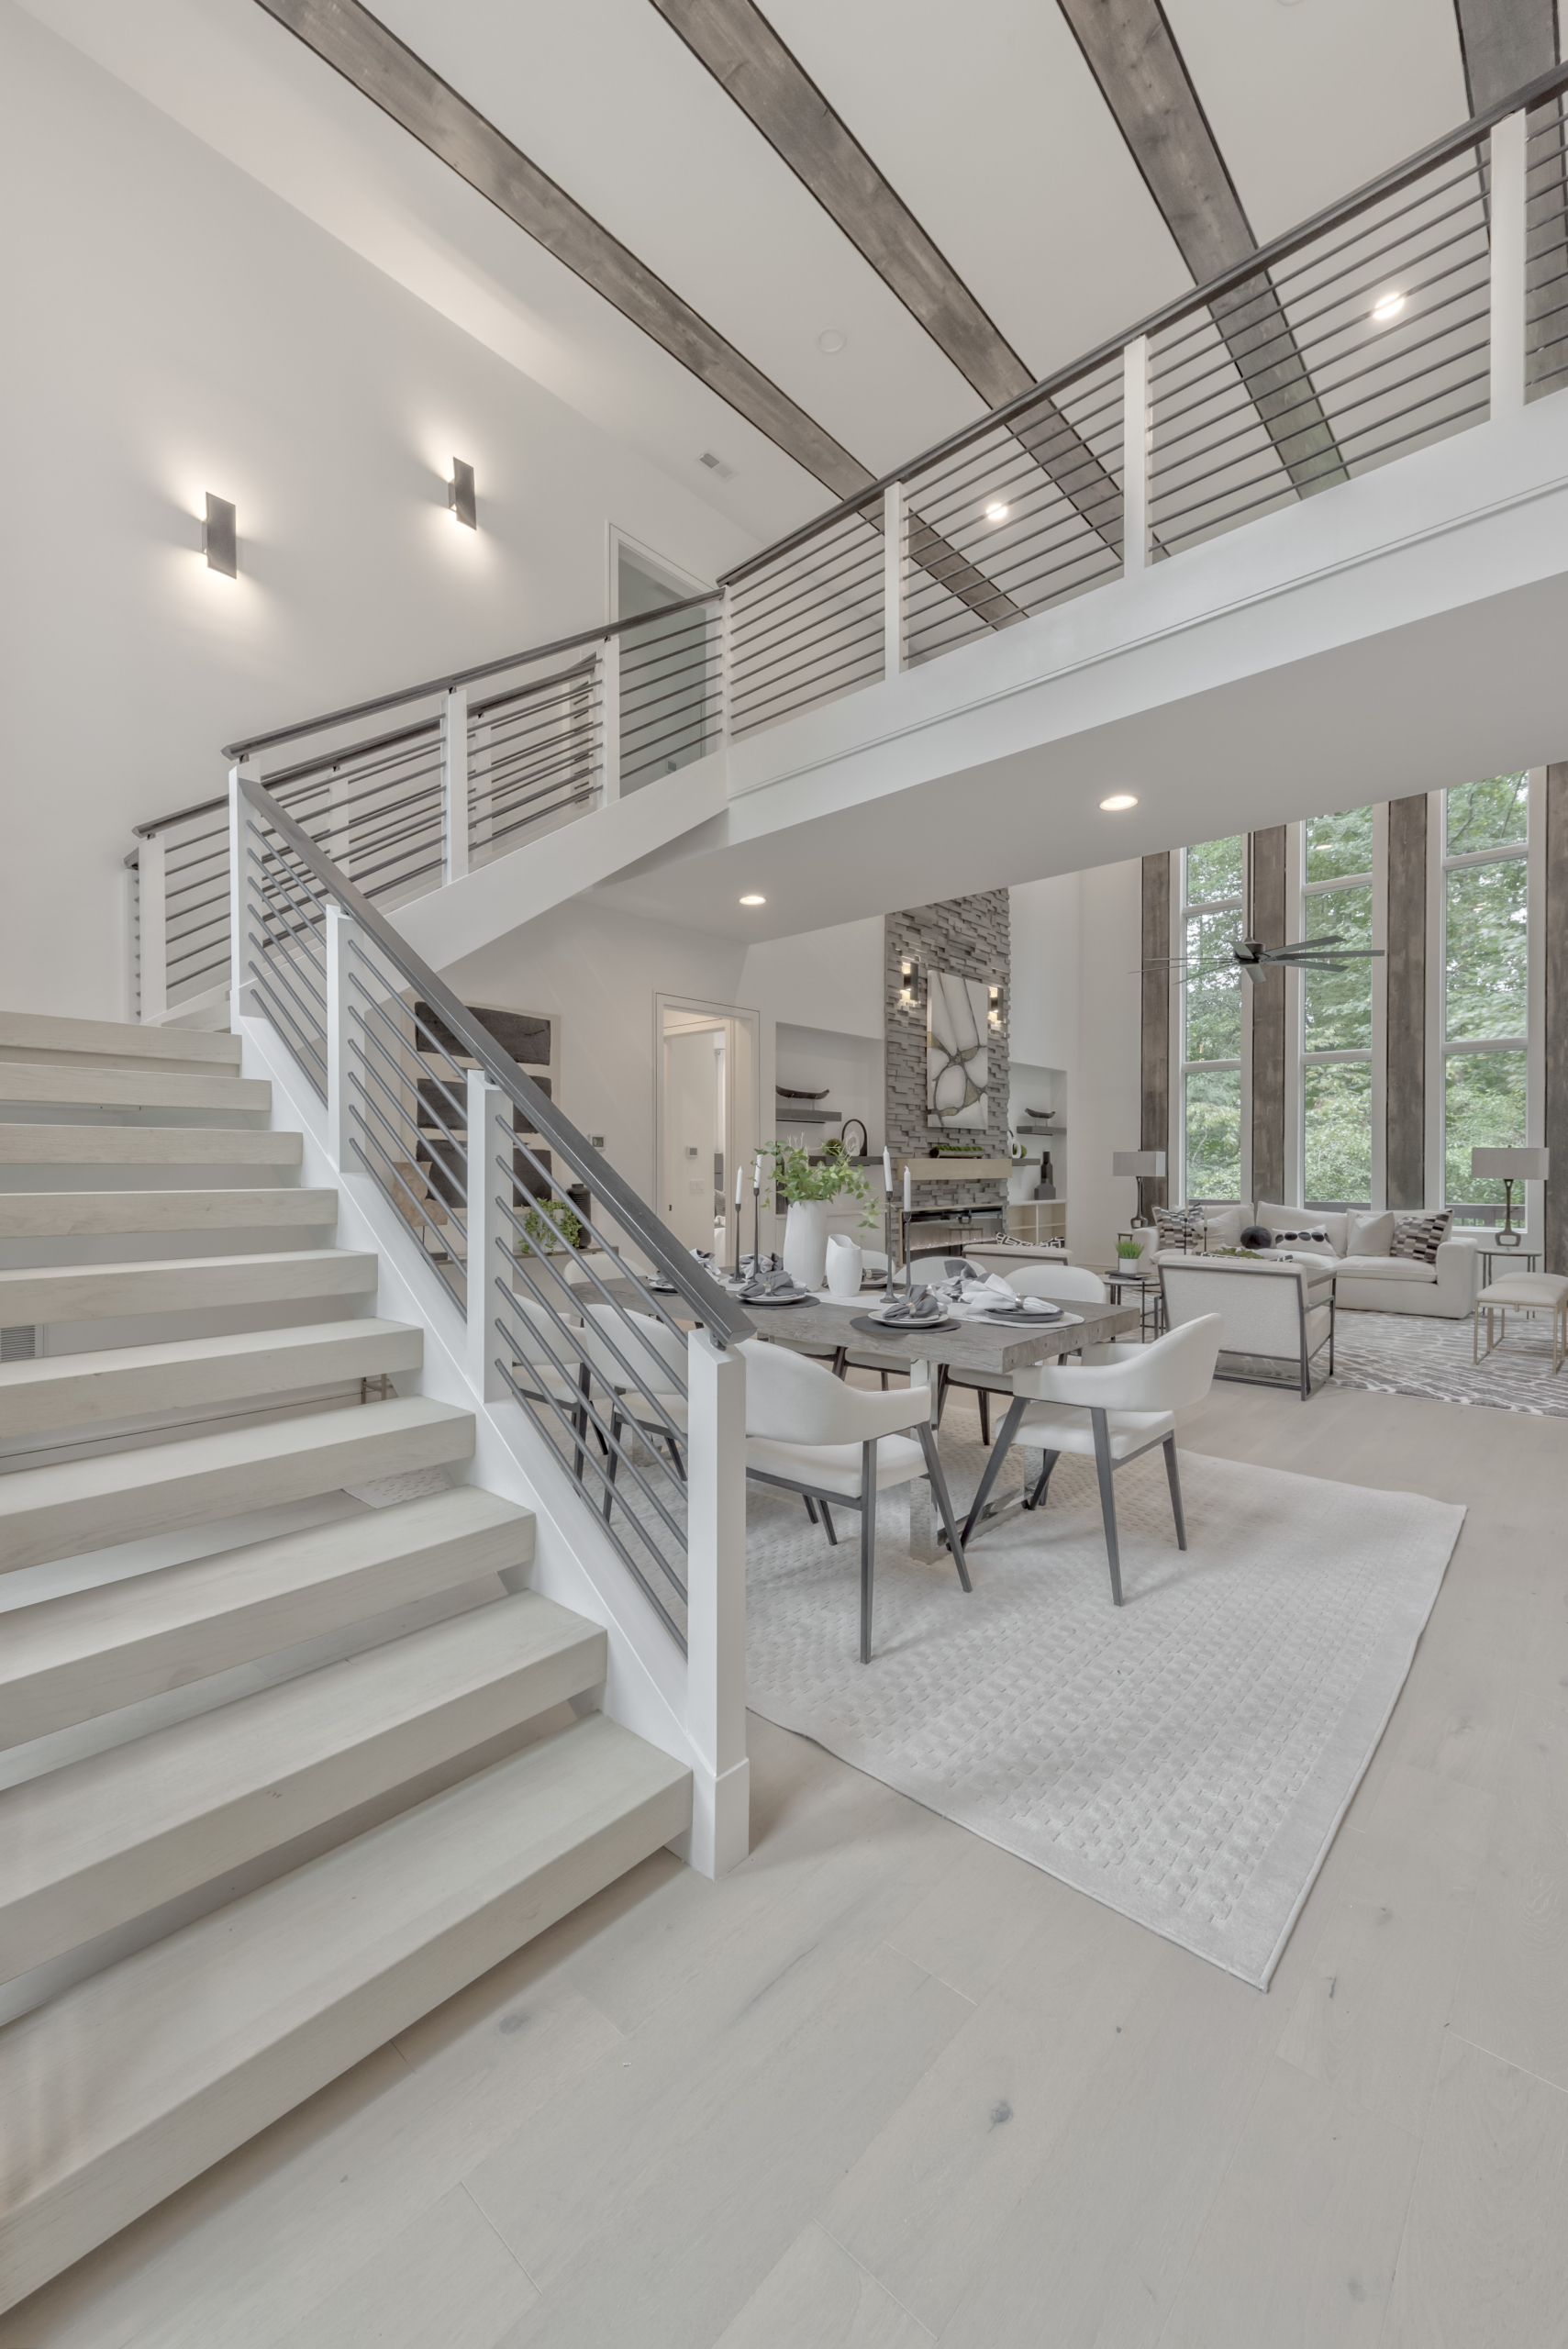 Floating staircase with aluminum railings, floor to ceiling windows and wall sconce lighting and open catwalk with open dining room and living room with tall ceilings